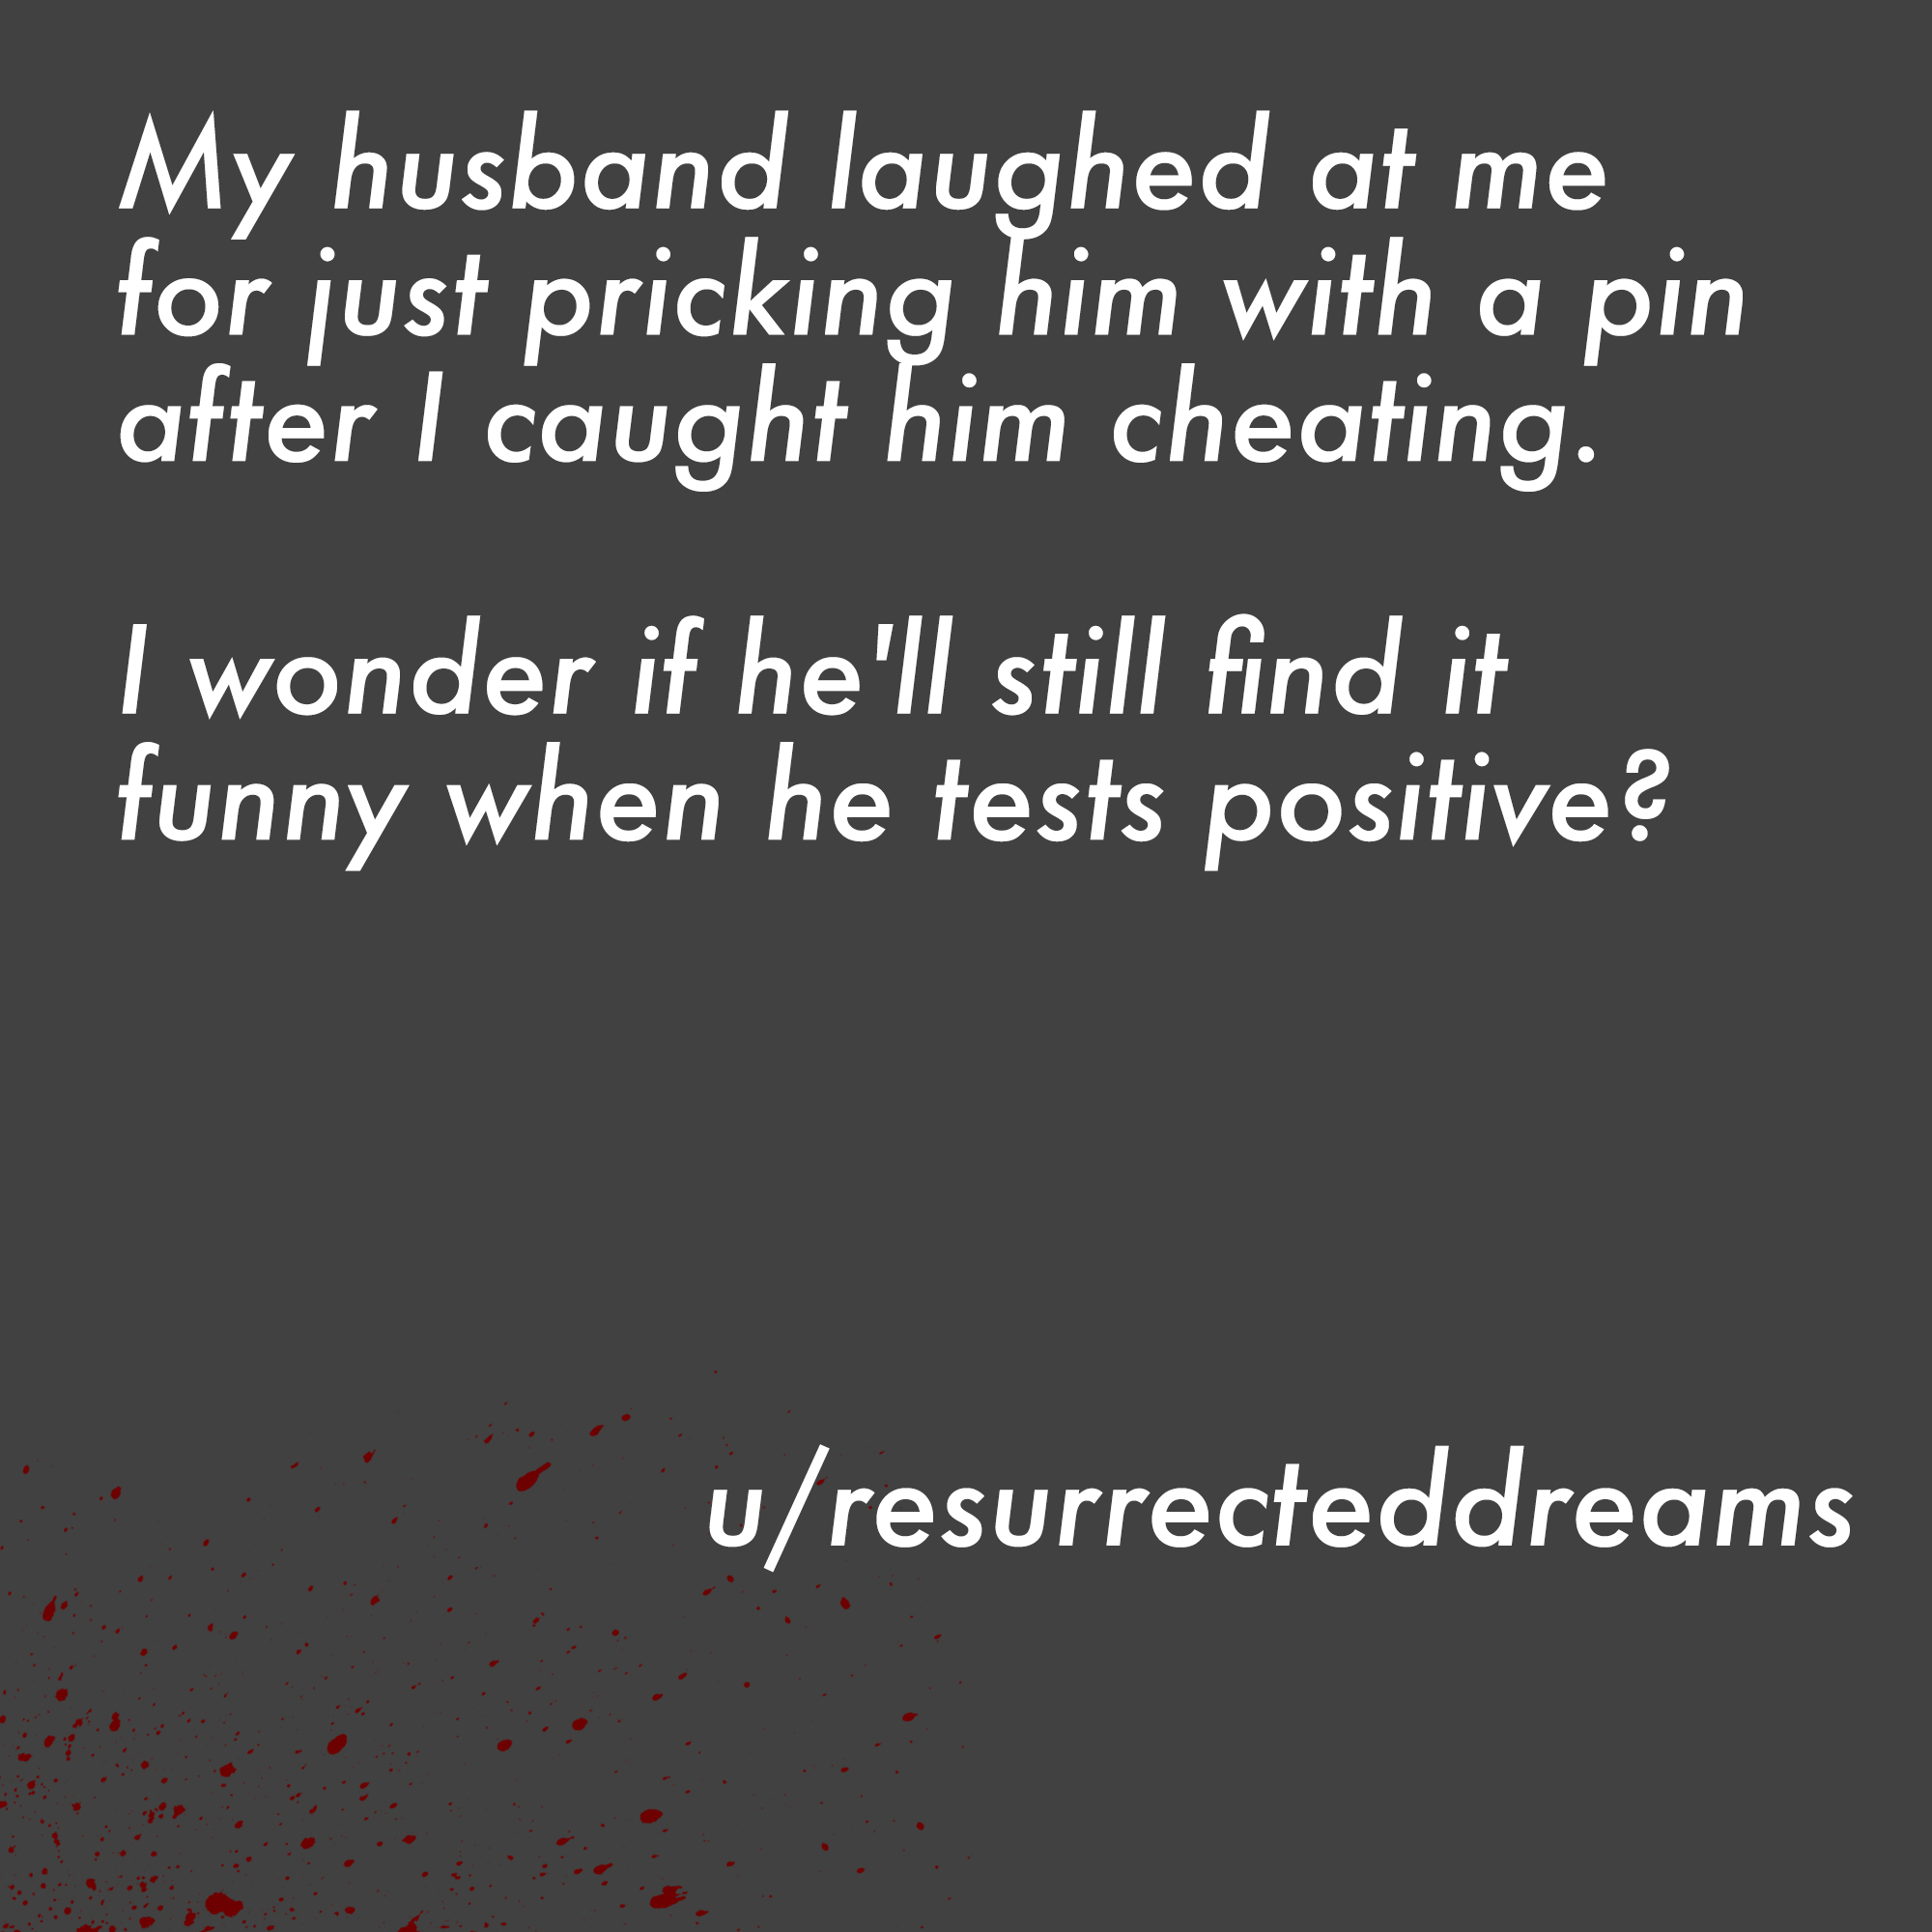 two line horror stories - Çanakkale zaferi video - My husband laughed at me for just pricking him with a pin after I caught him cheating. I I wonder if he'll still find it funny when he tests positive? uresurrecteddreams